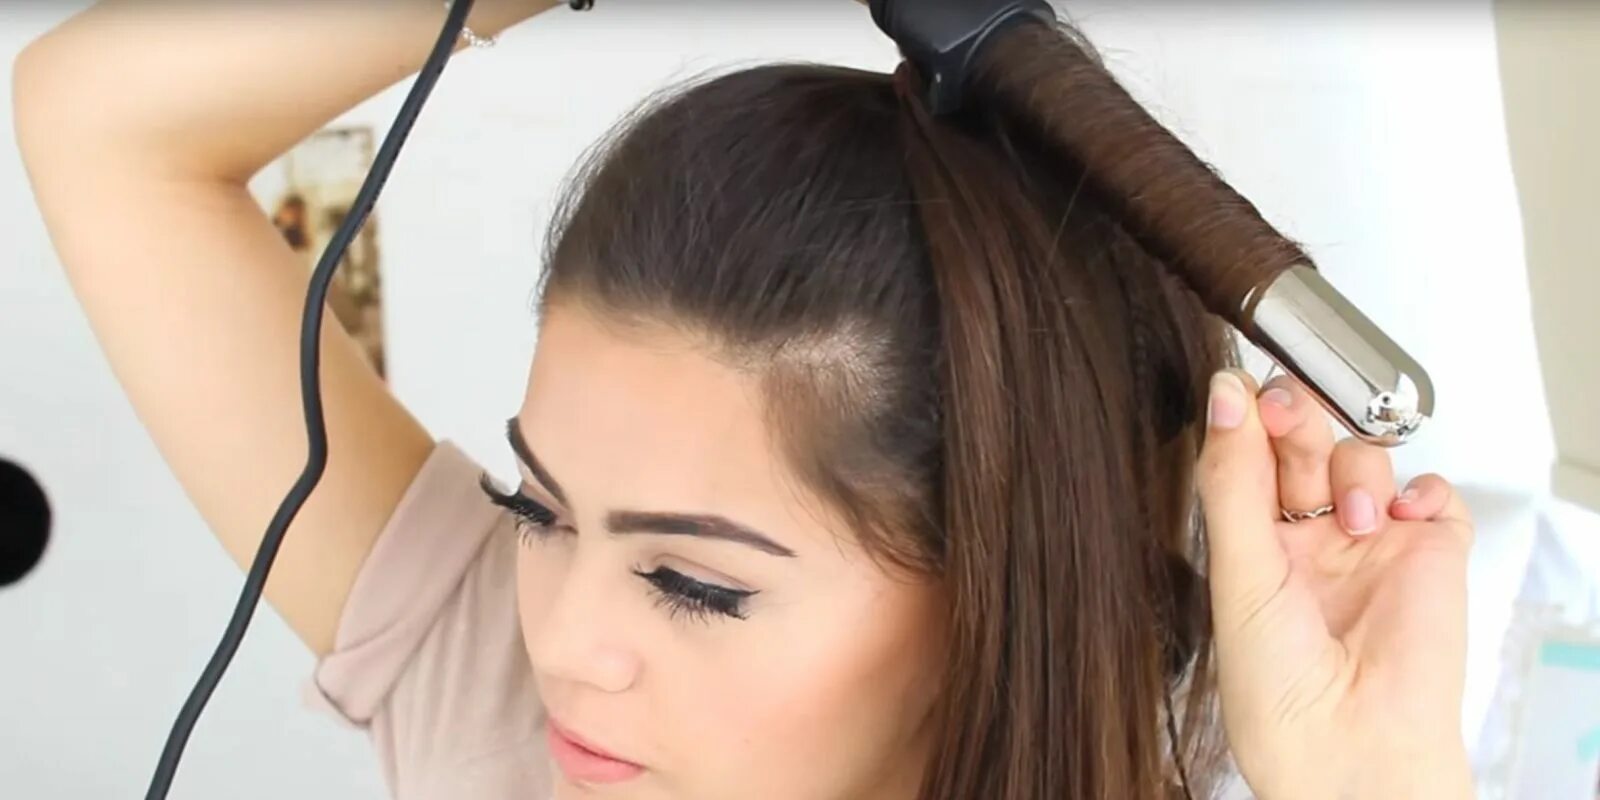 How to curl. Керлер для окрашивания. Curl your hair with a Curling Stick. Curling Iron your simple. Curlycomb your hair with a Curling Iron.